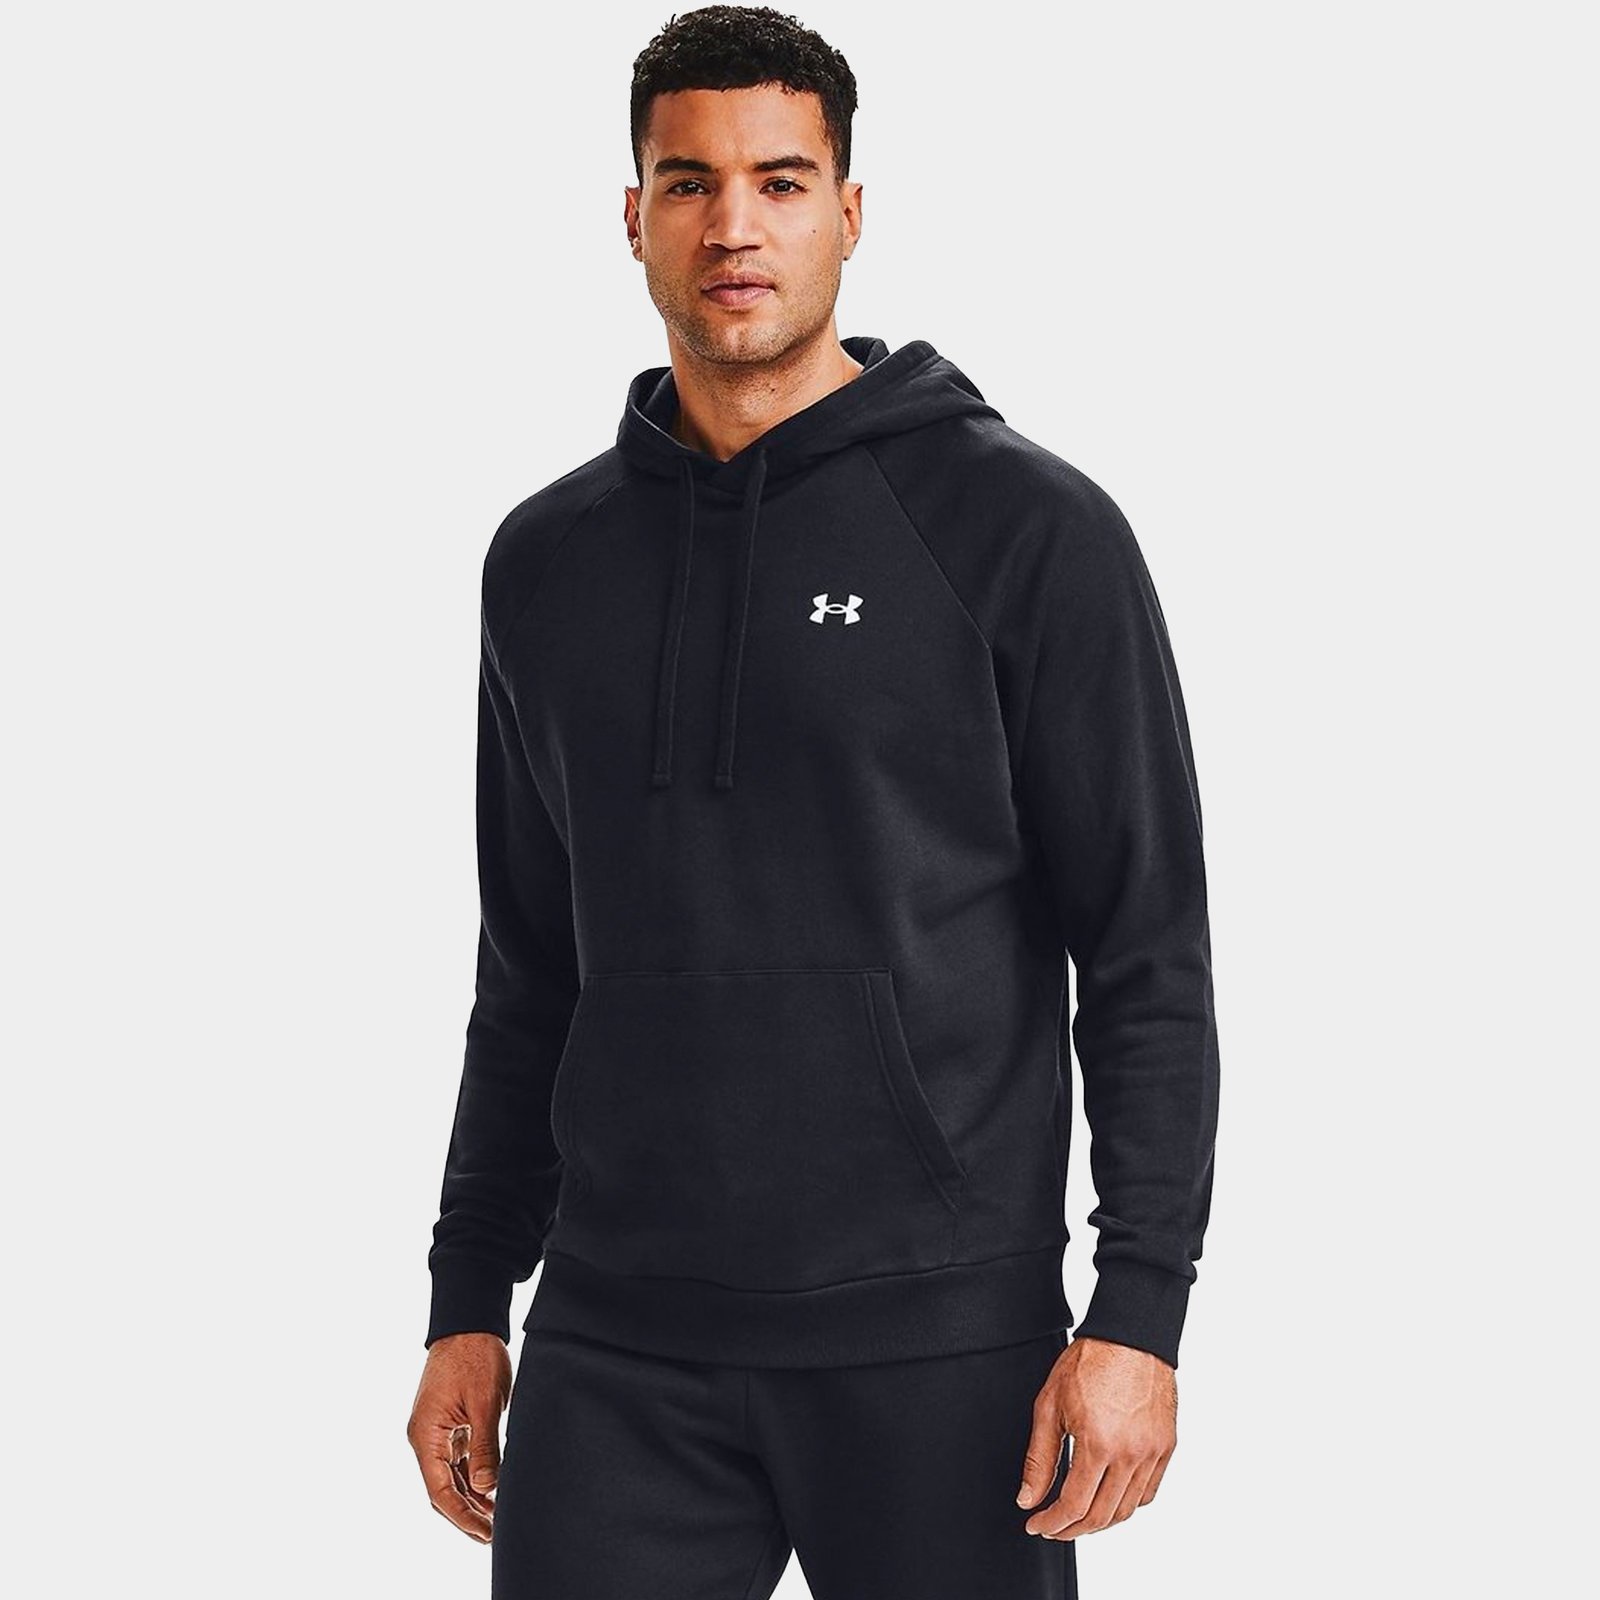 Under Armour Rugby Hoodie - all